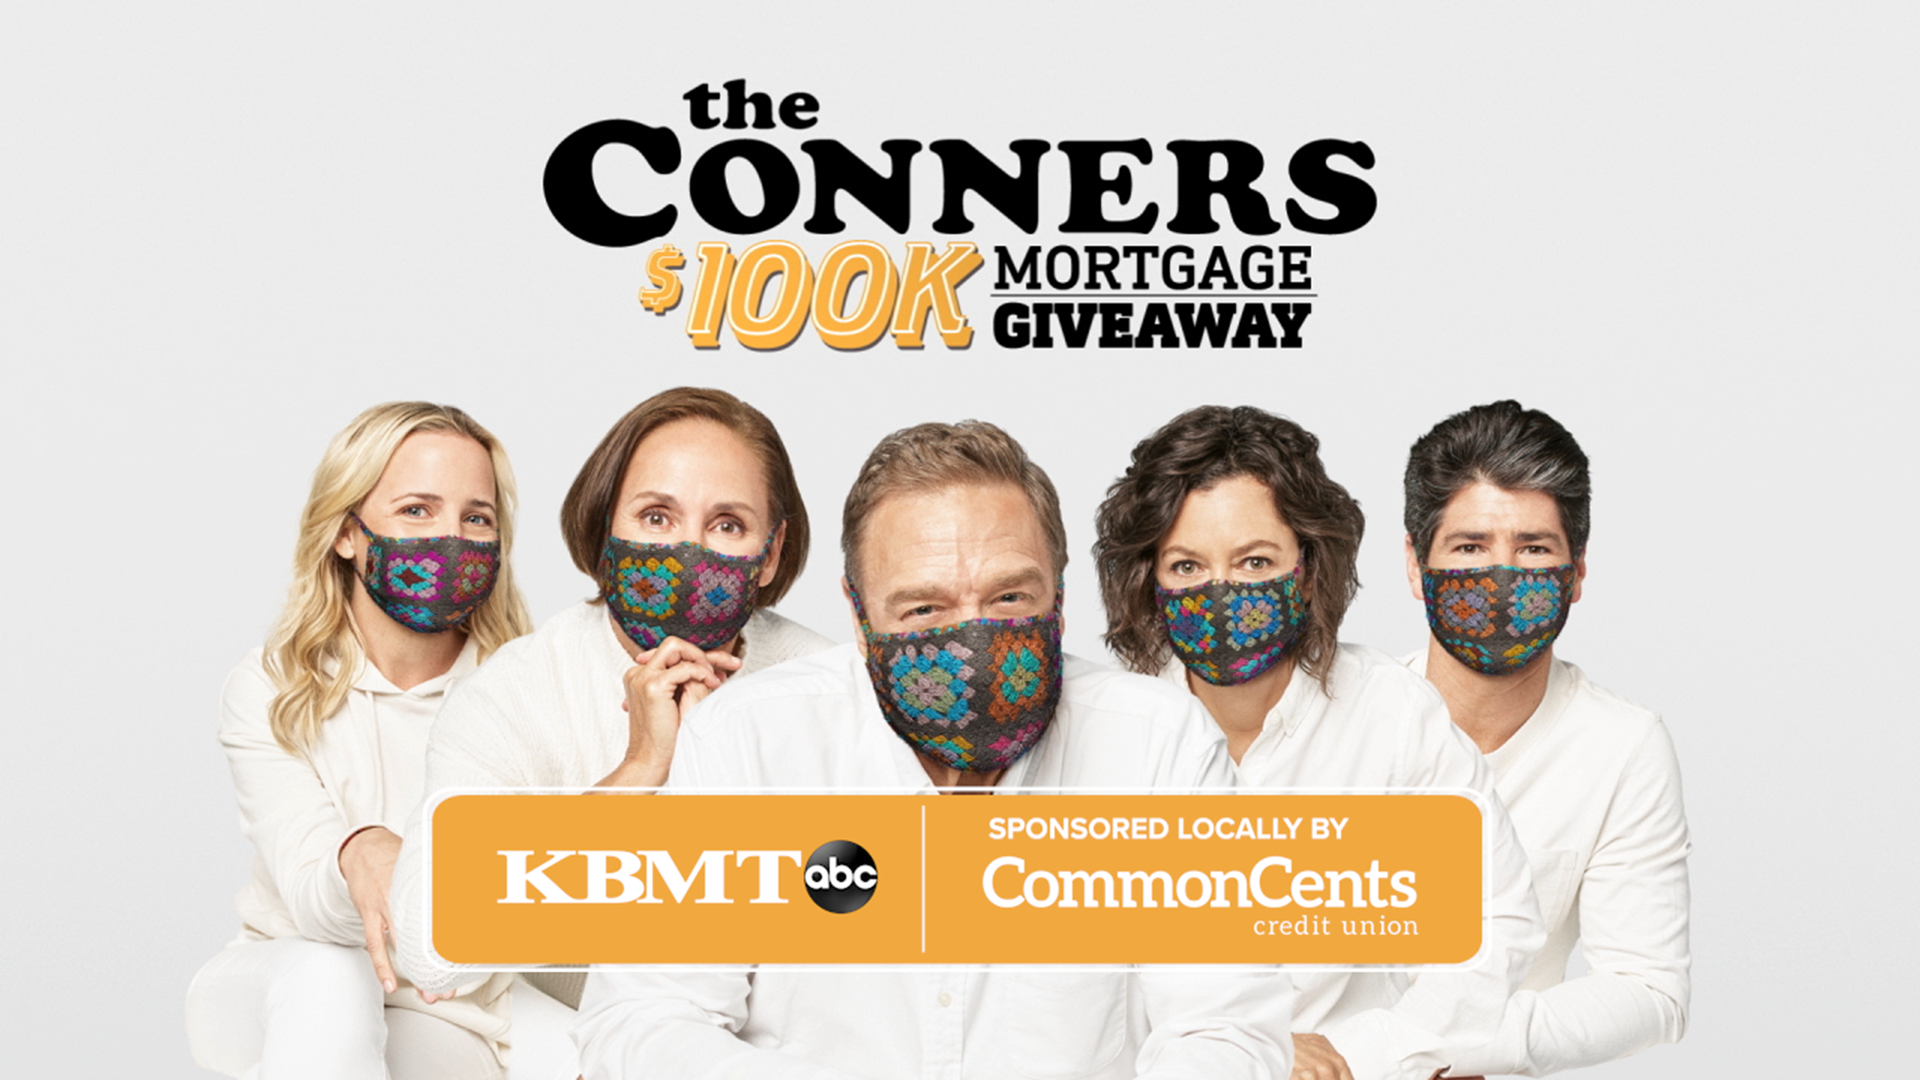 The Conners $100K Mortgage Giveaway is a contest aiming to ease the burden for five deserving winners by surprising them with $20K each.